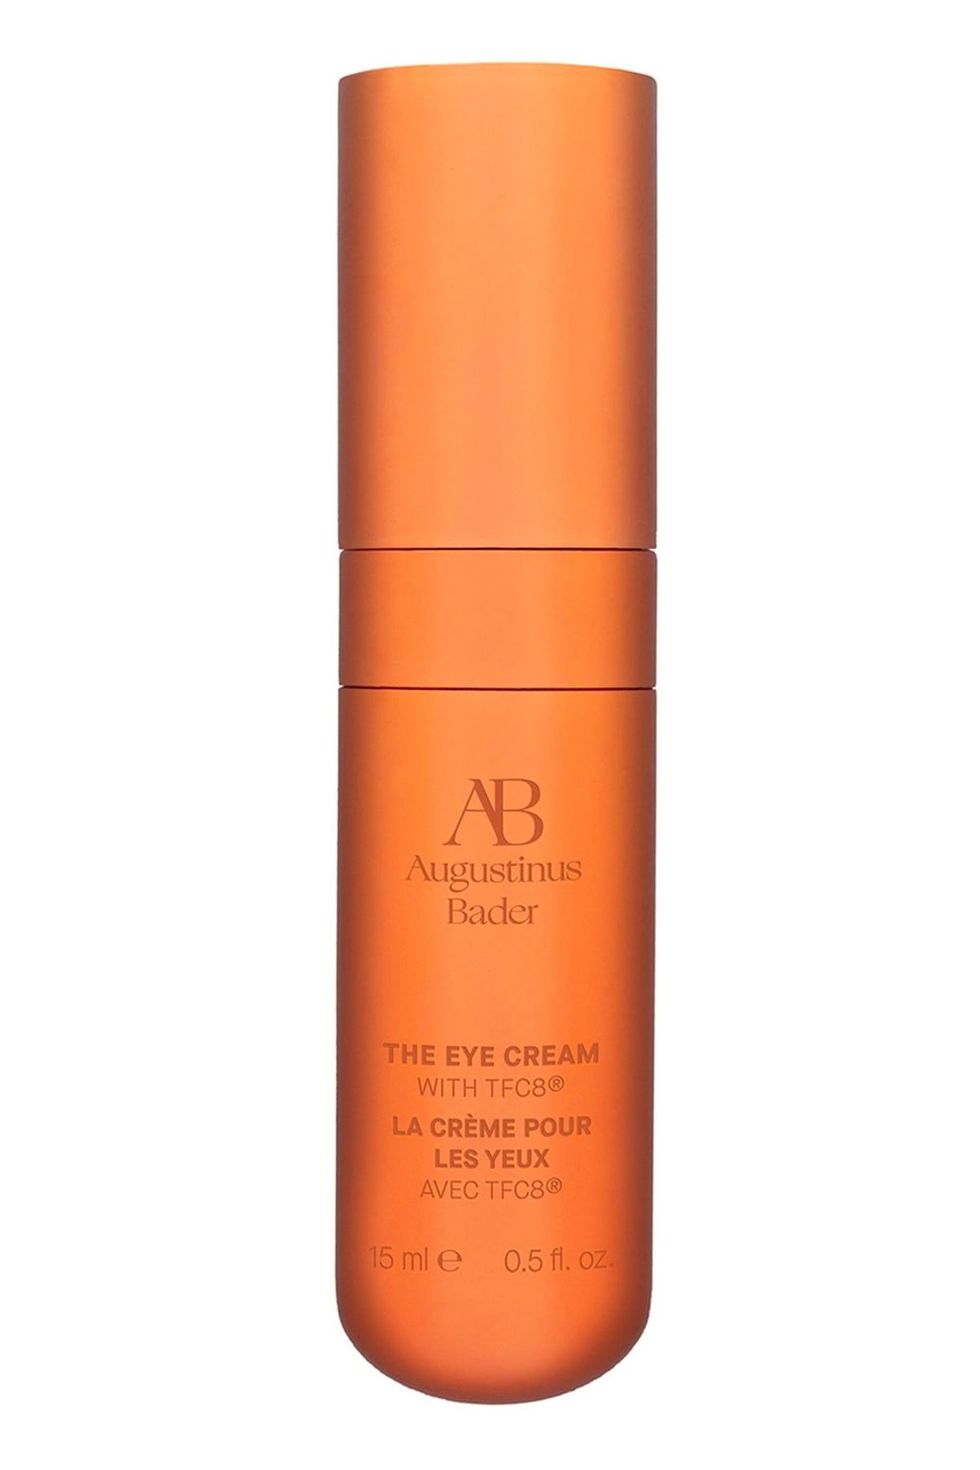 The Eye Cream with TFC8